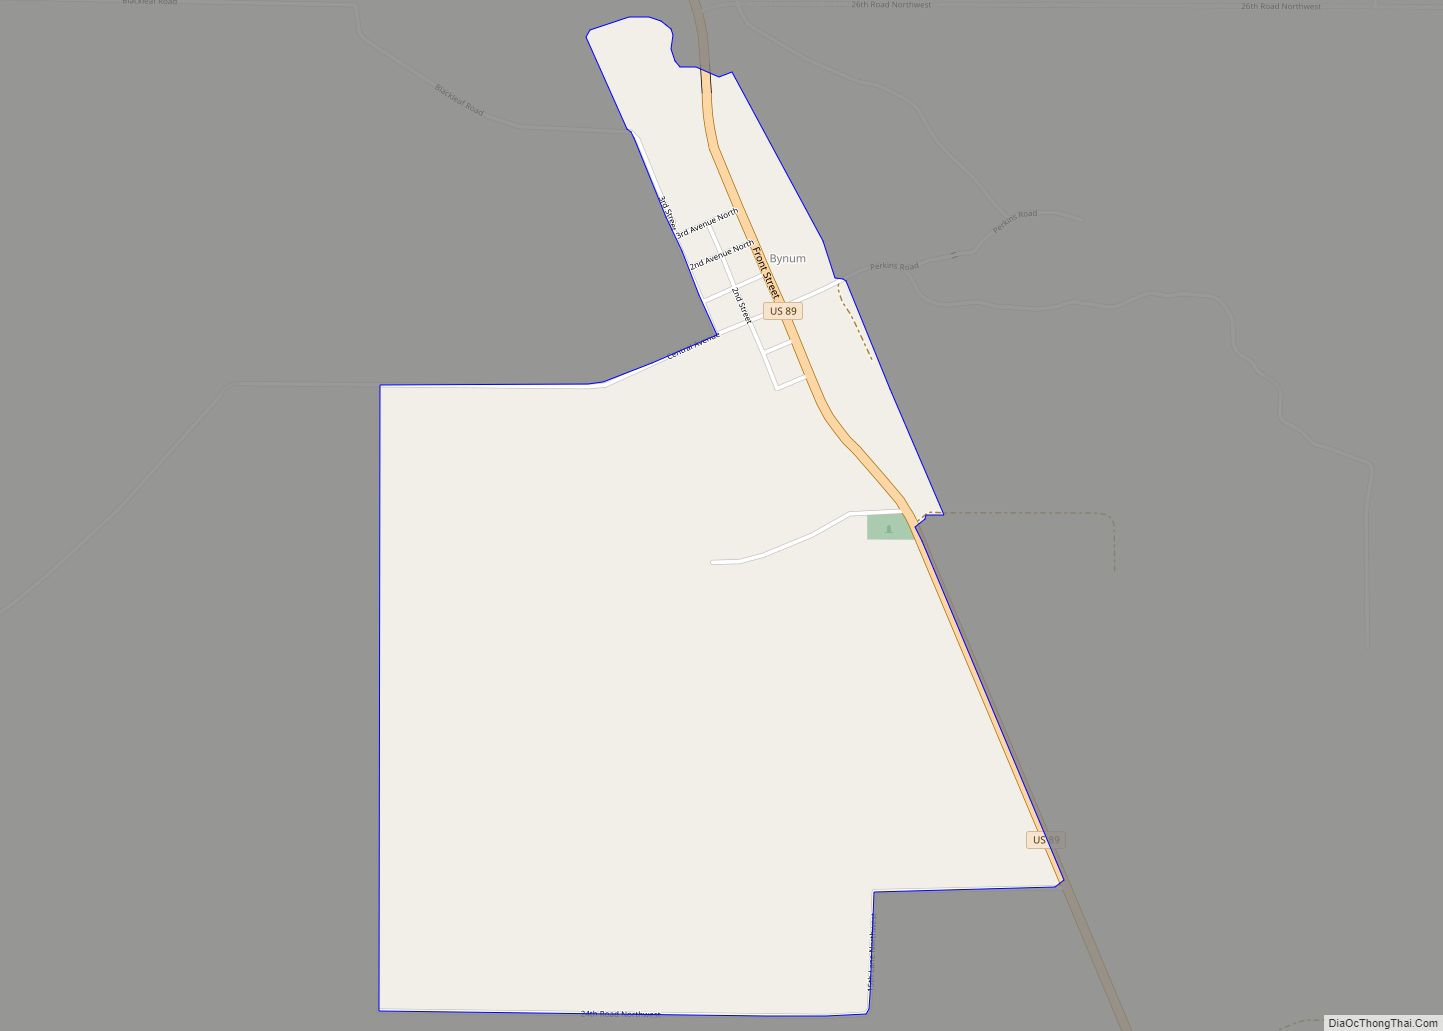 Map of Bynum CDP